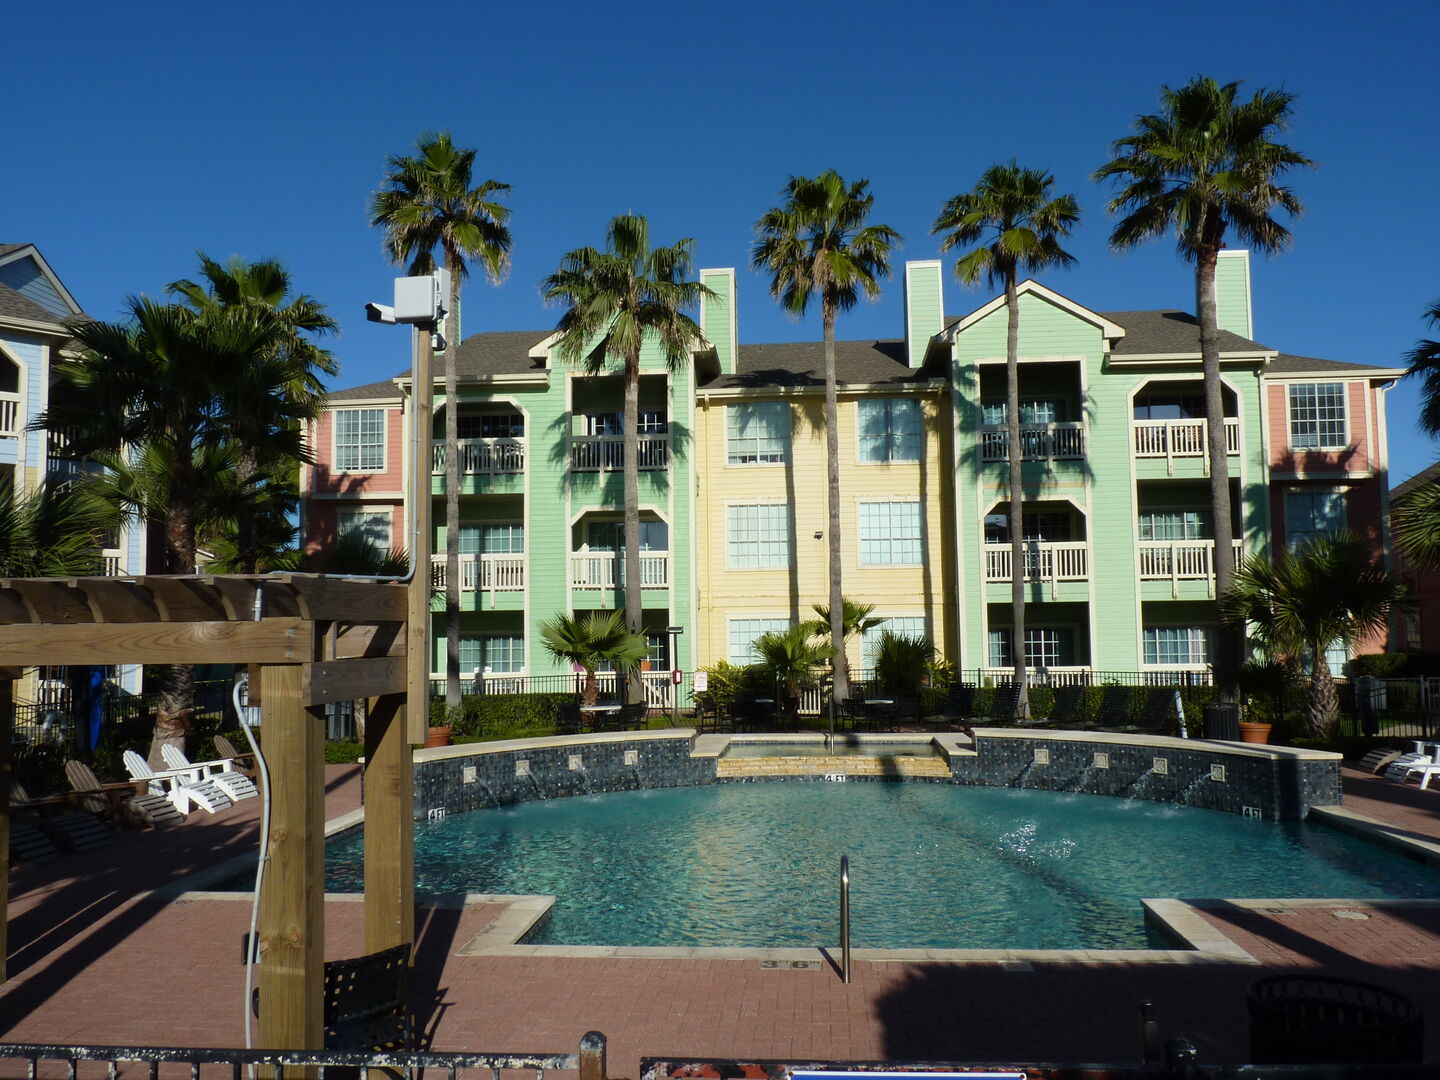 The Dawn Condominiums offer two beautiful resort pools with plenty of  chaise loungers, chairs, and barbecue pits for guest use.